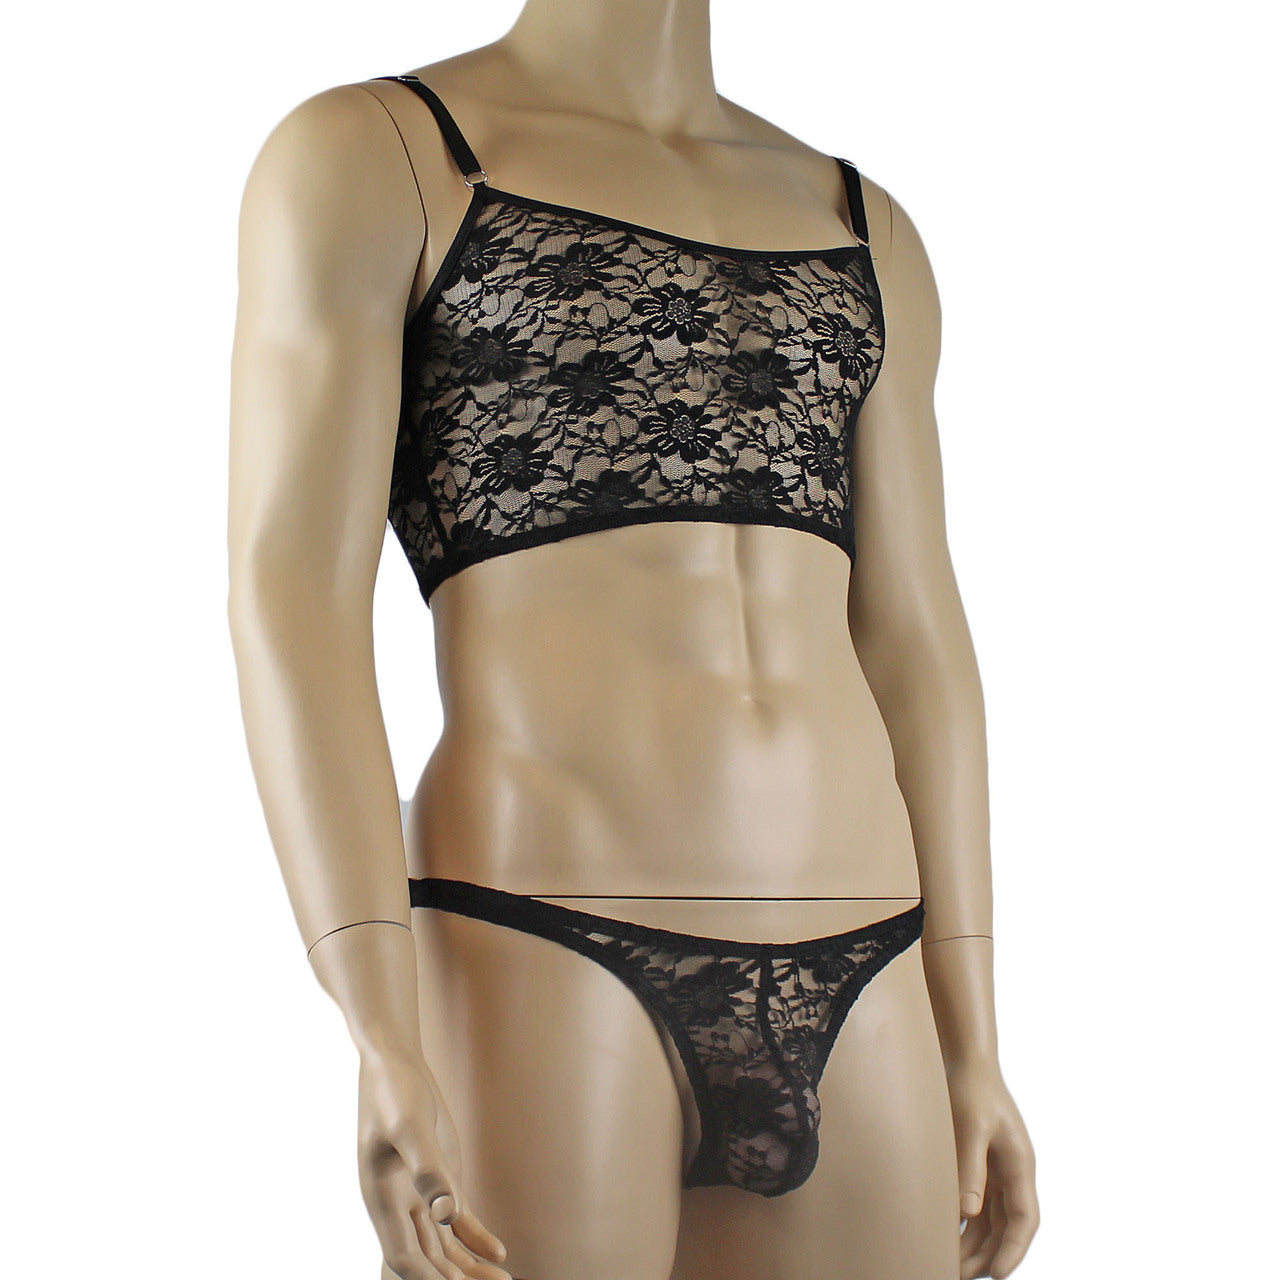 Mens Sexy Lace Crop Top Bra and Matching Lace Thong Black